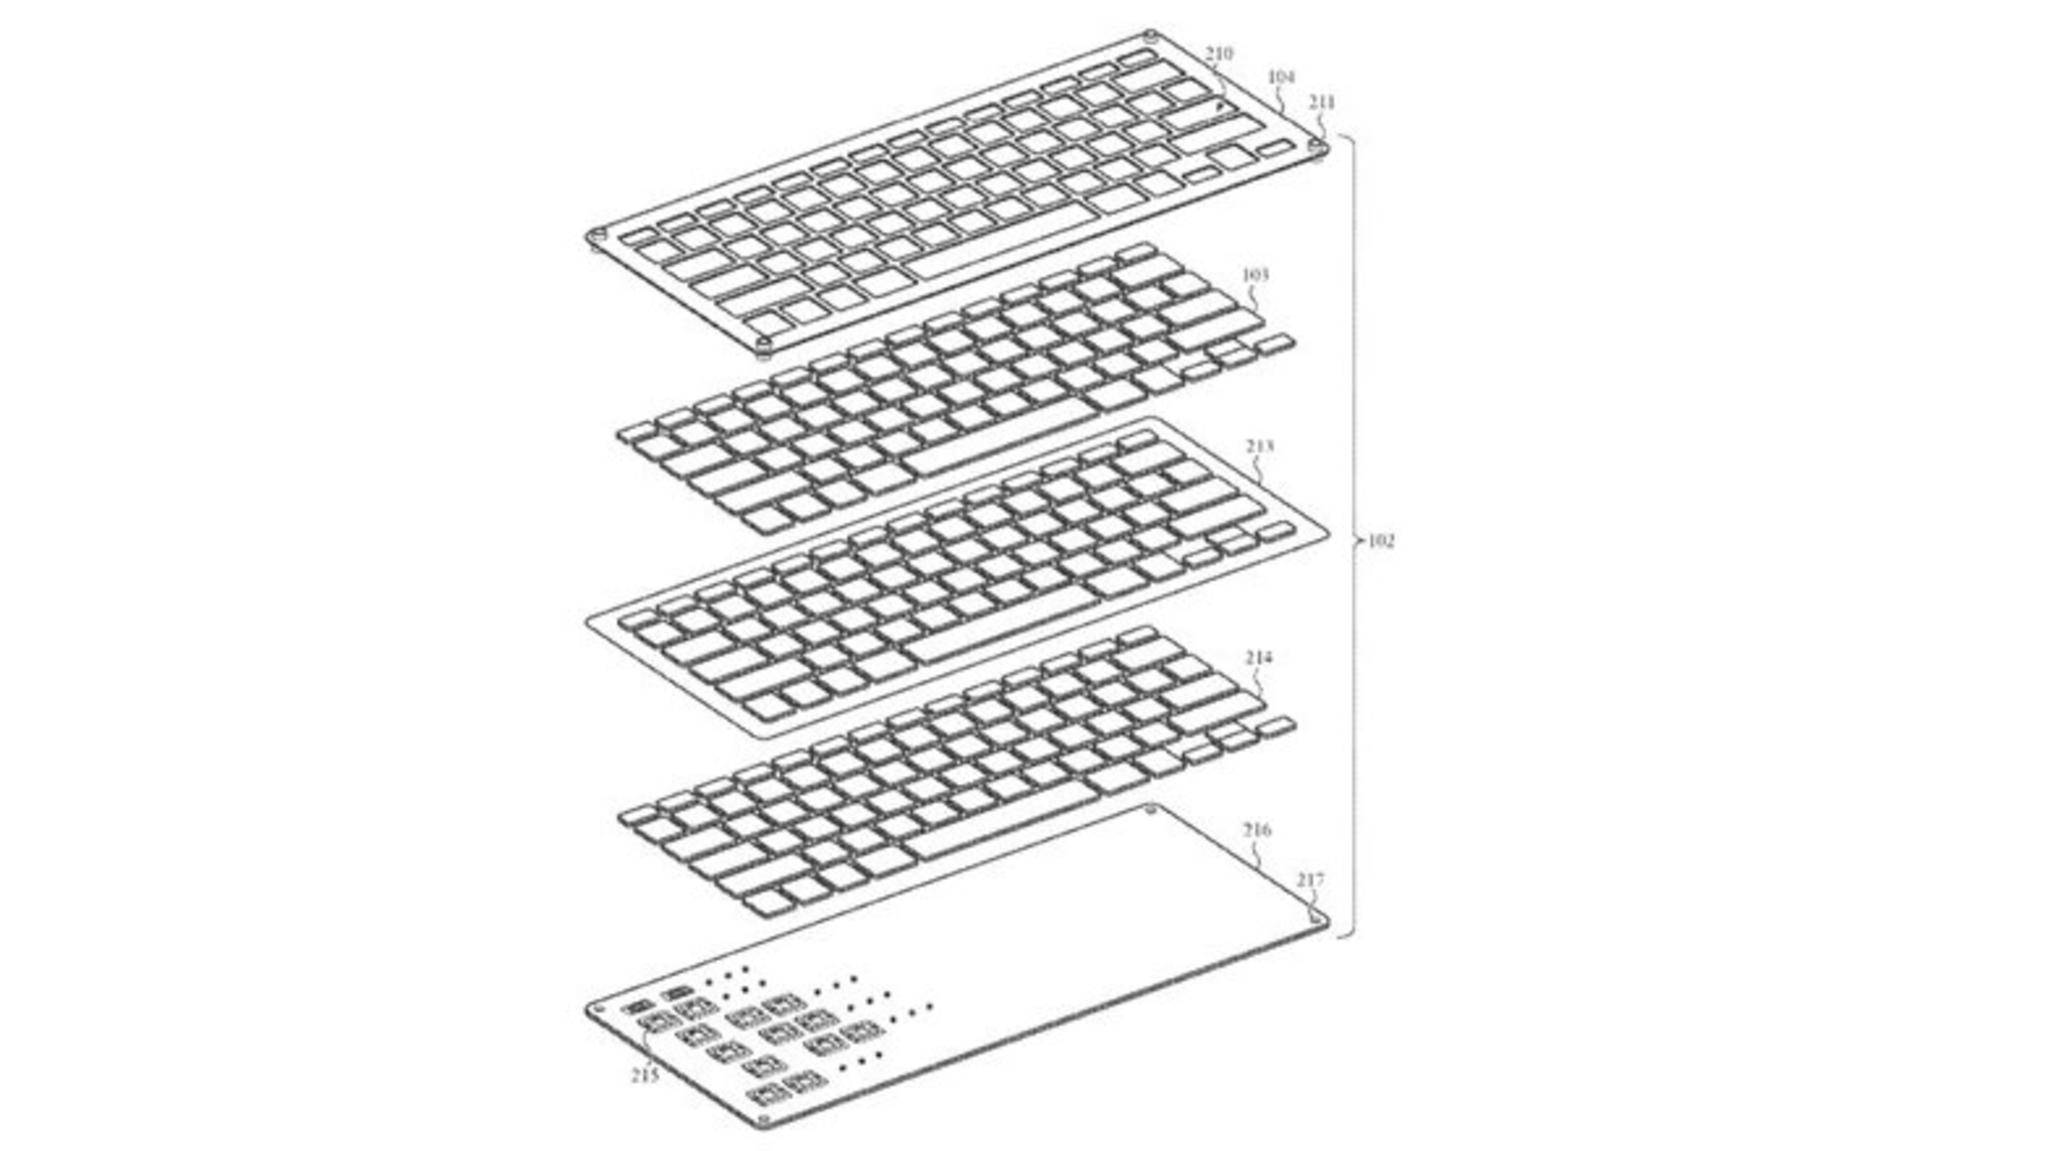 apple-patents-smudge-resistant-keyboard